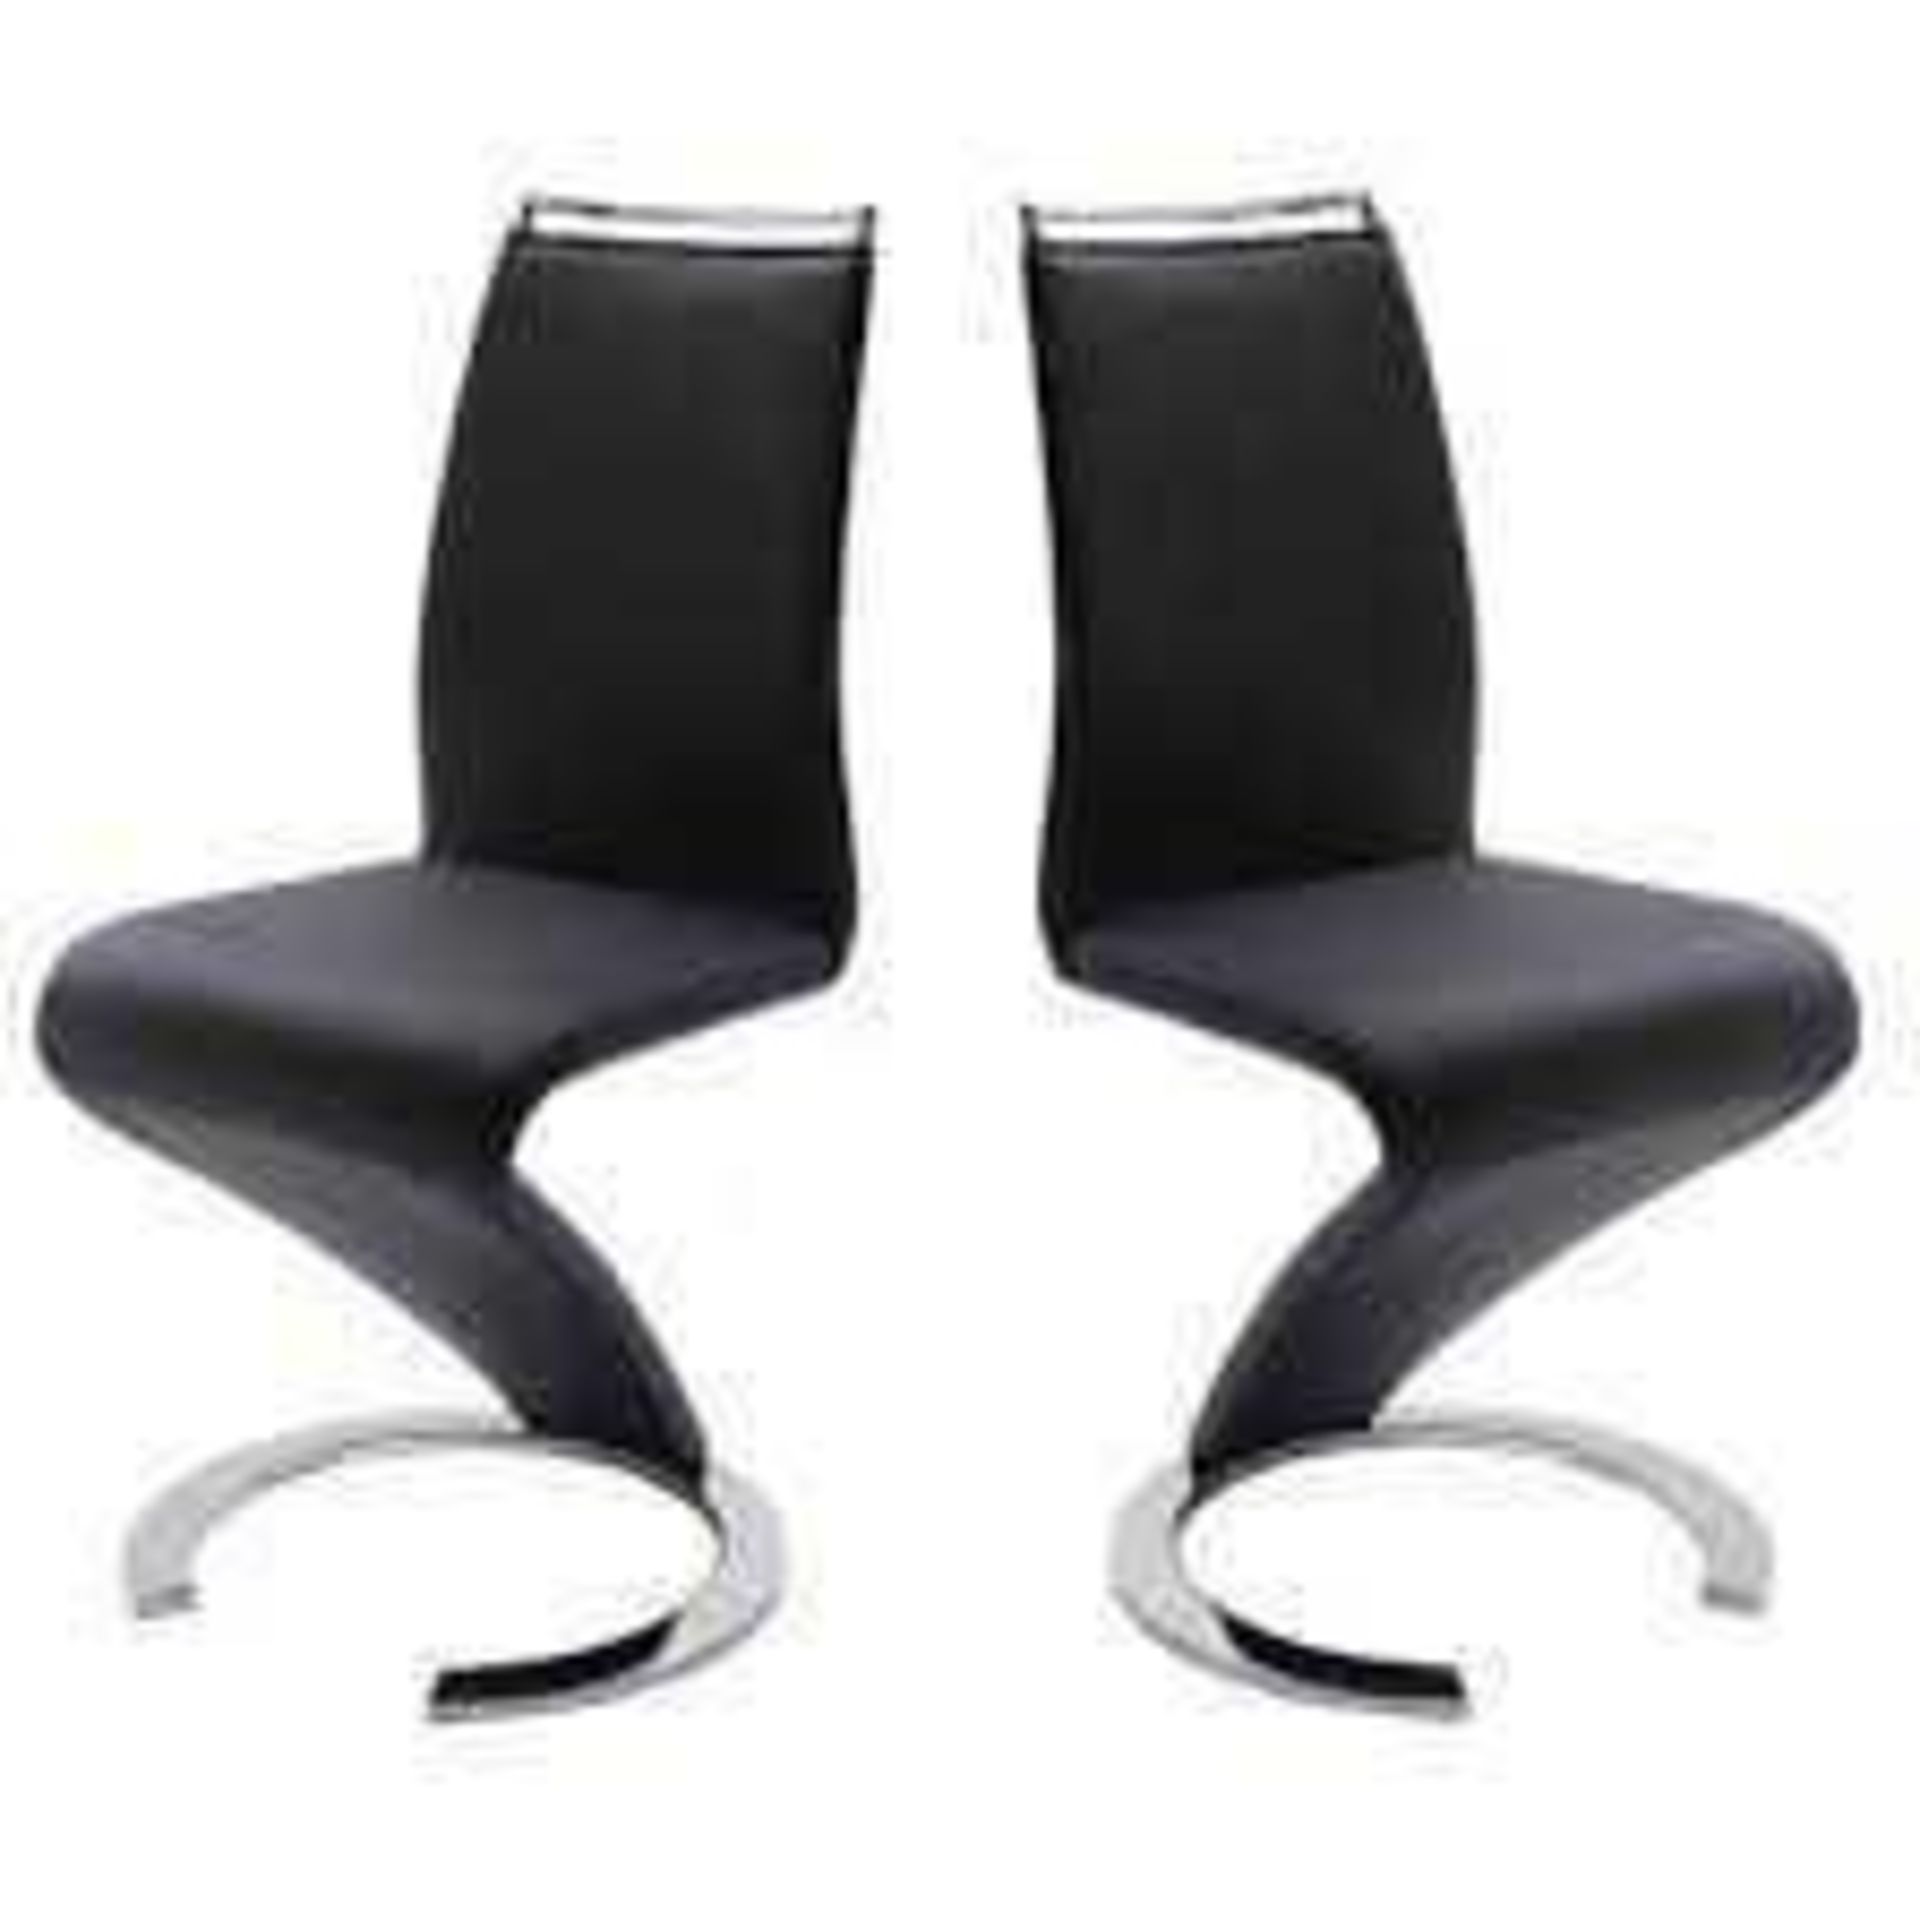 RRP £200. Boxed Summer Z Chair Set Of 2 - Black